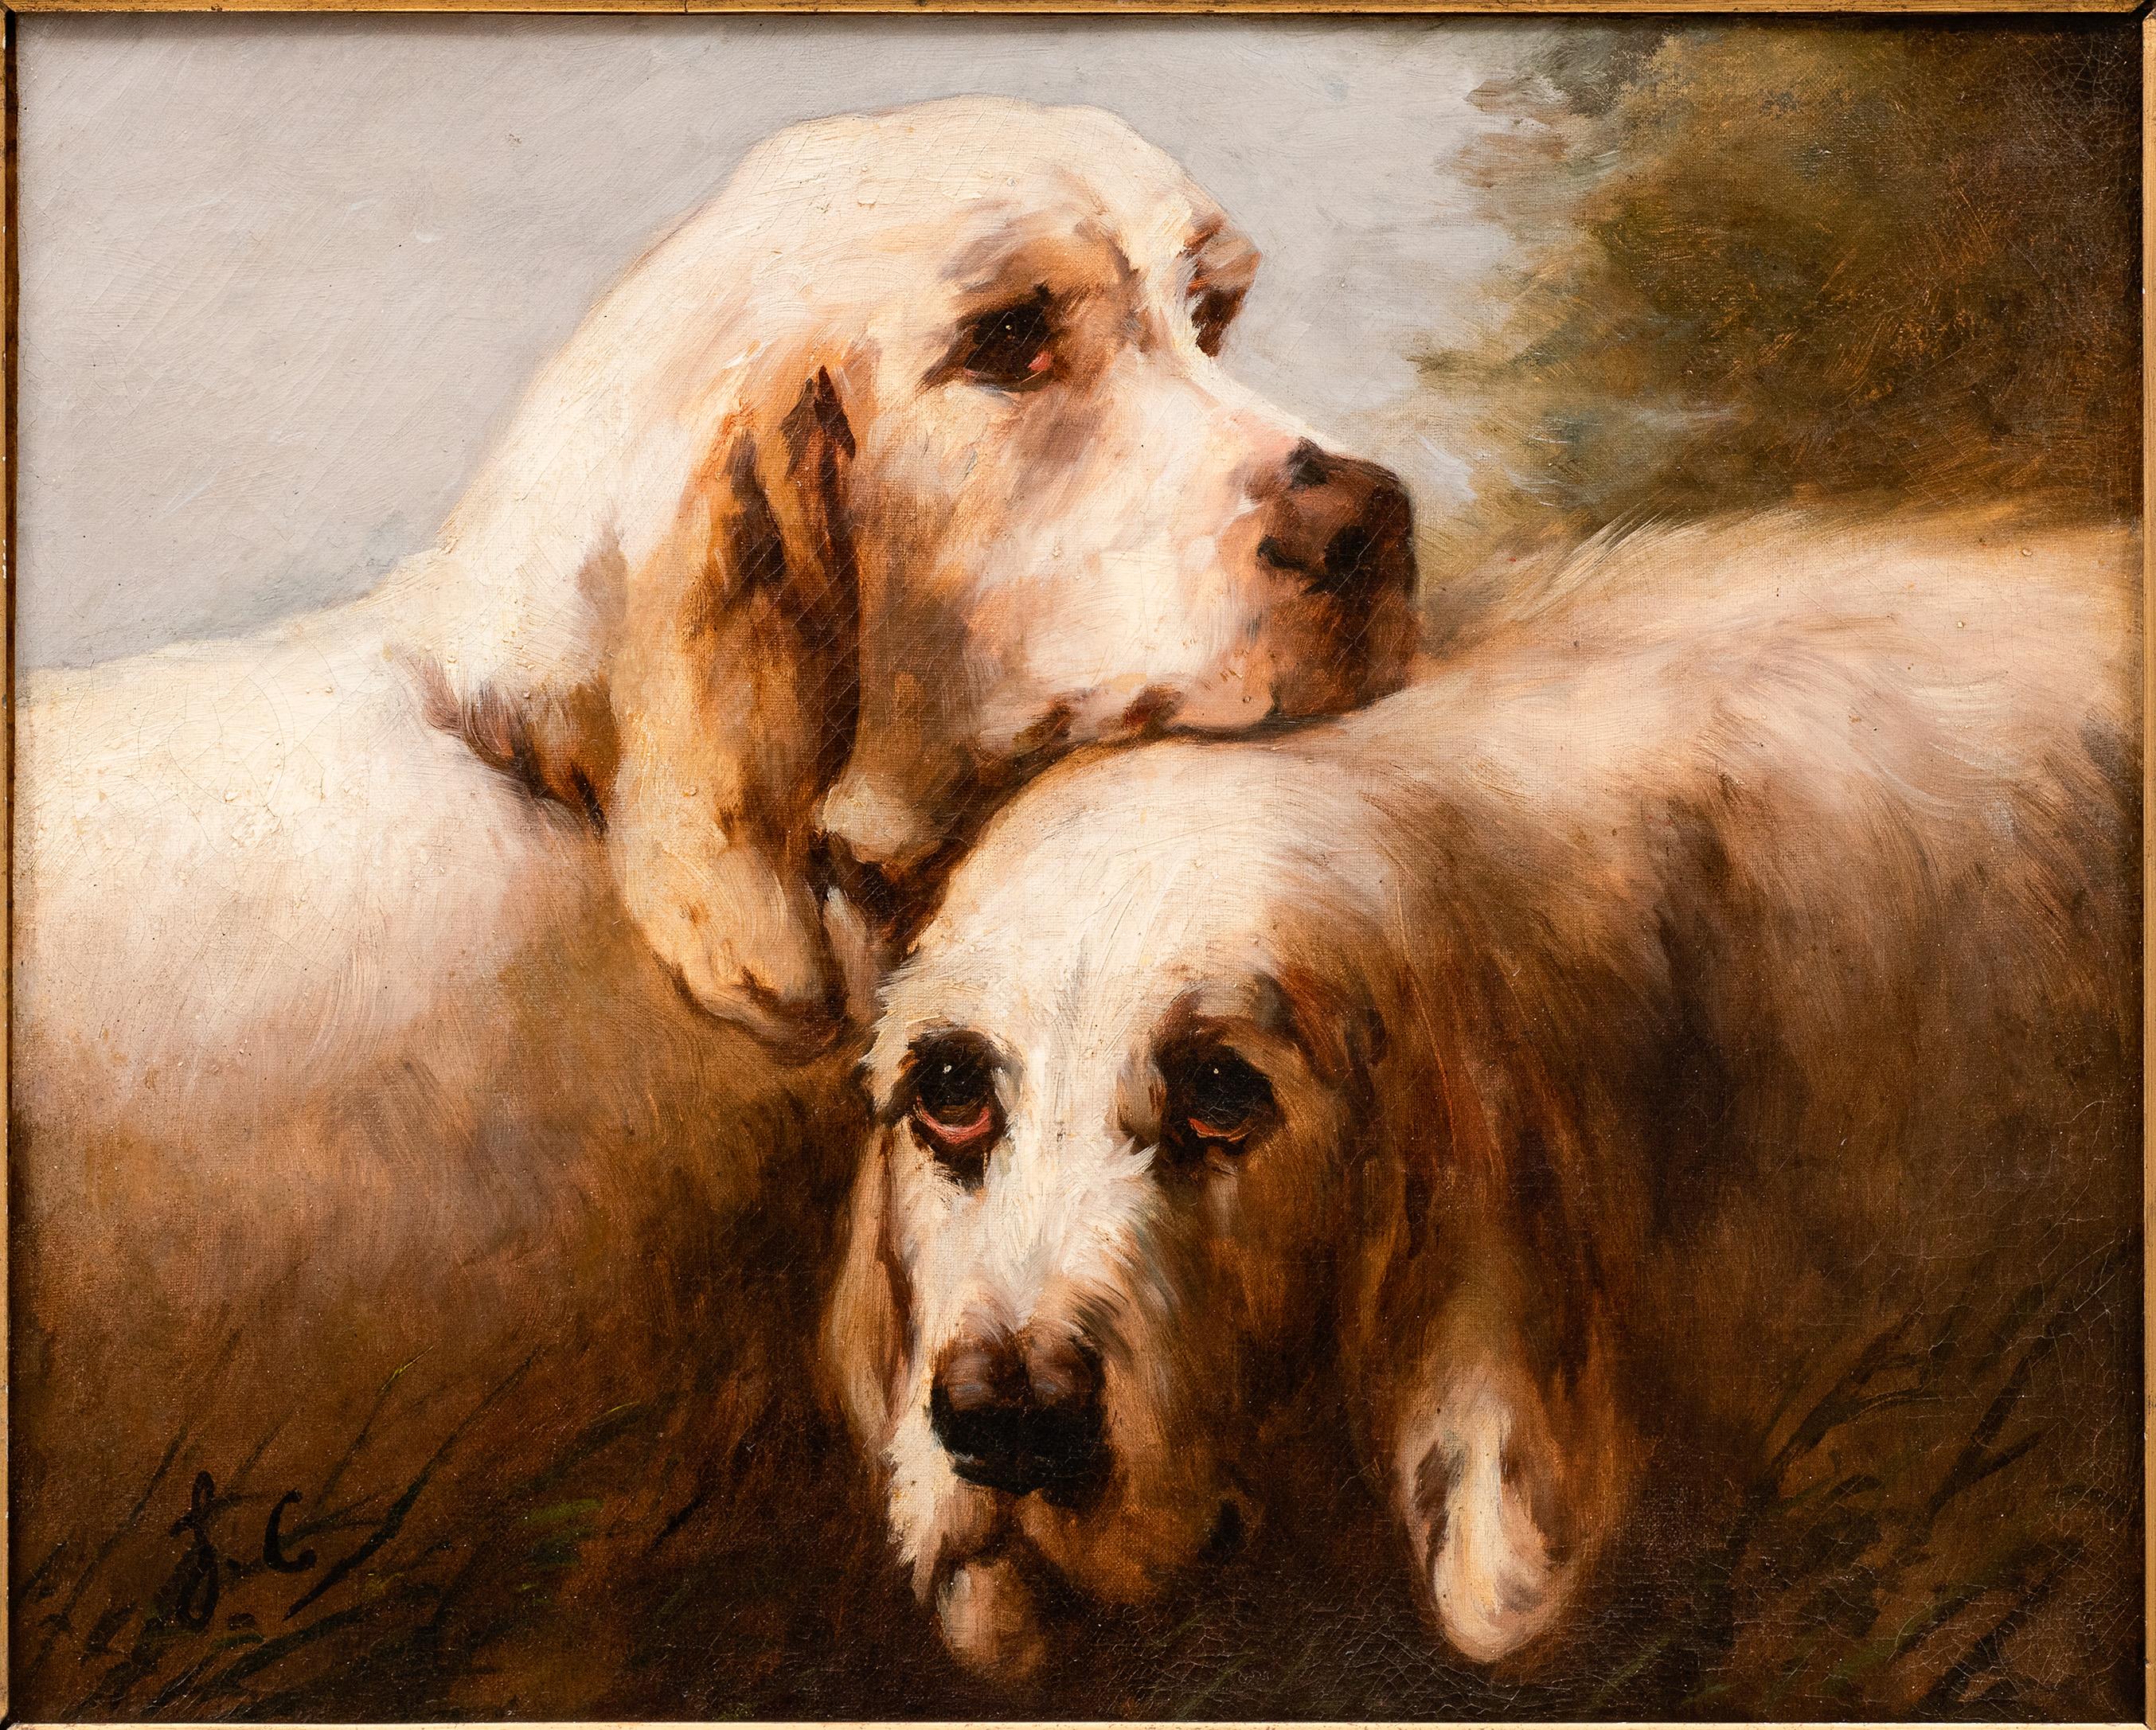 Jules Chardigny Portrait Painting - Antique Dog Painting: Pair of Grand Griffon Vendéen Hunting Dogs, circa 1870